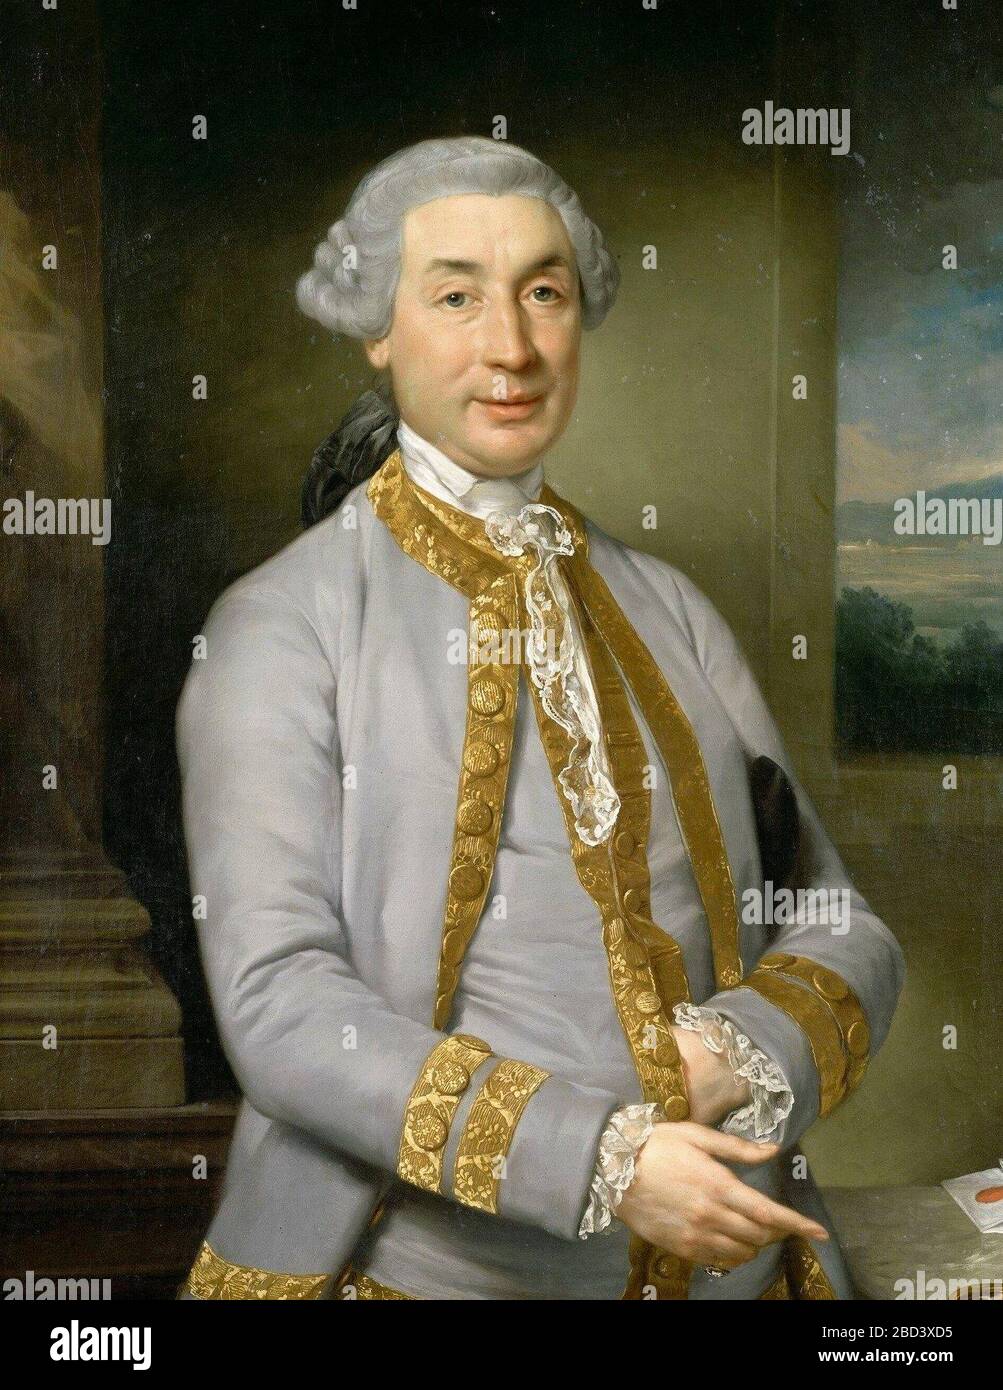 Portrait of Carlo Maria Buonaparte, father of Napoleon Bonaparte. This is one of few portraits of the father of Napoleon. In this half–length posthumous portrait, Carlo Maria (1746-1785) is dressed as a gentleman of the Ancien Régime with powdered wig and a coat laced with gold. Stock Photo